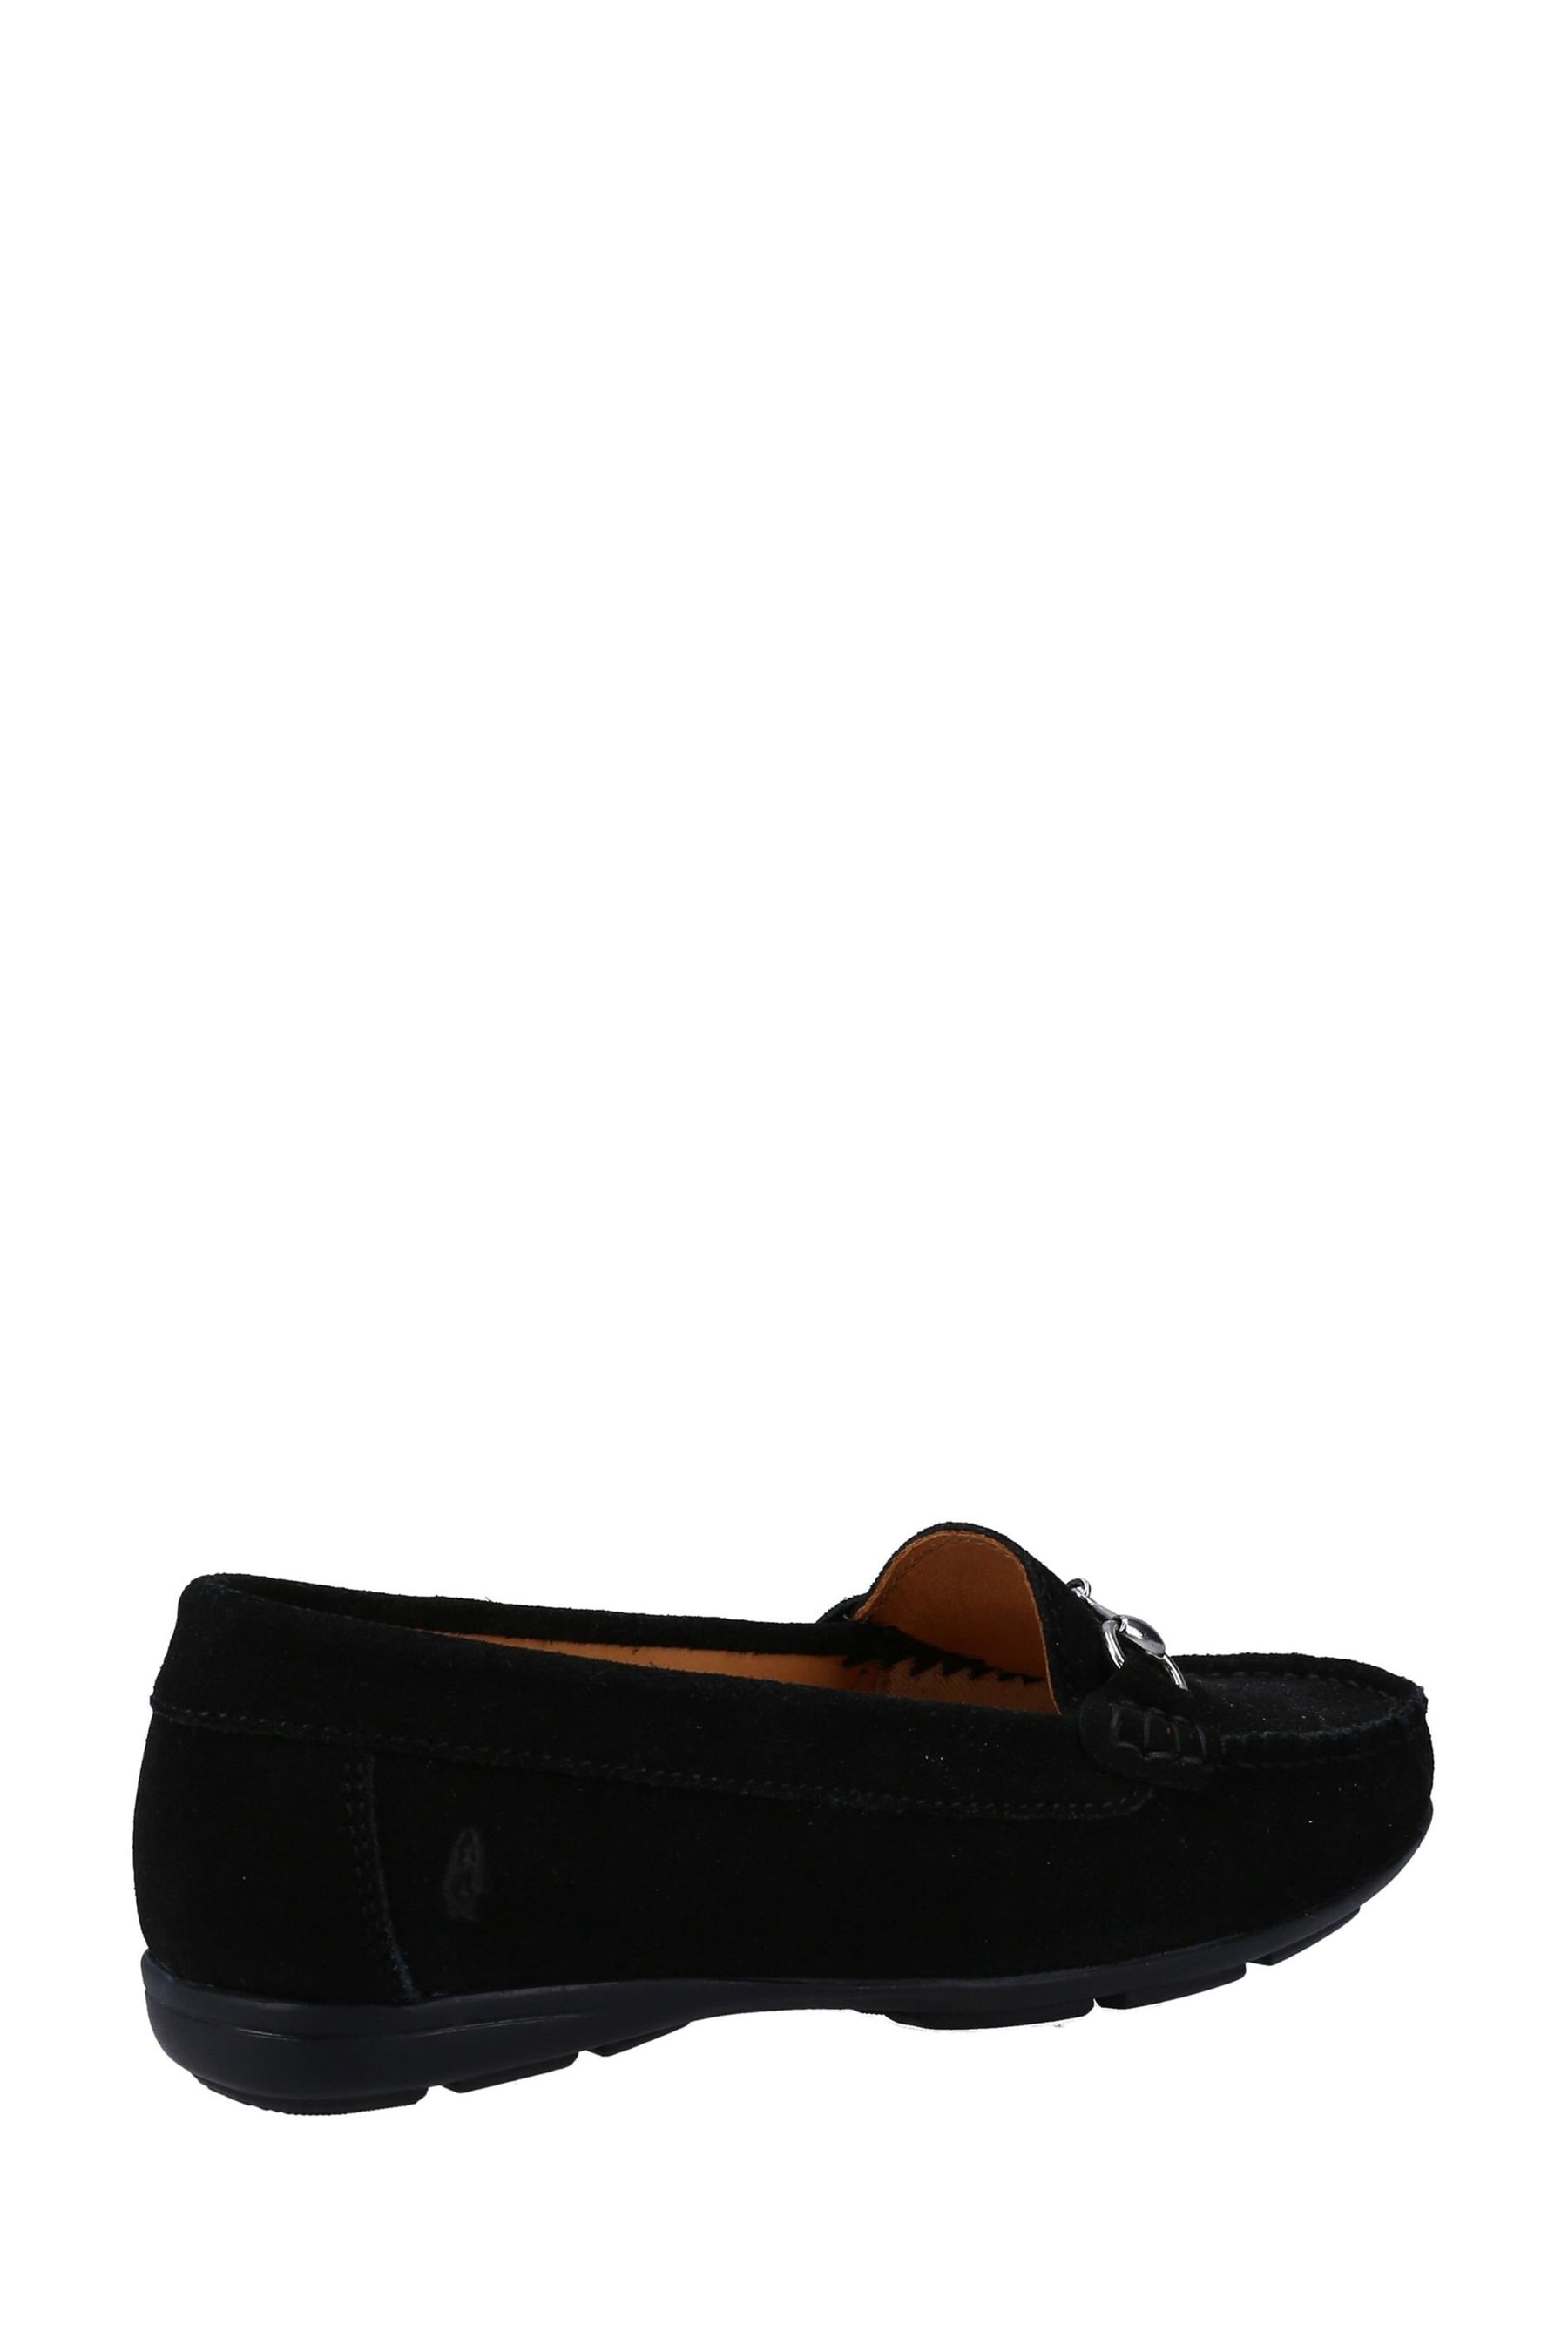 Buy Hush Puppies Molly Snaffle Loafer Black Shoes from the Next UK ...